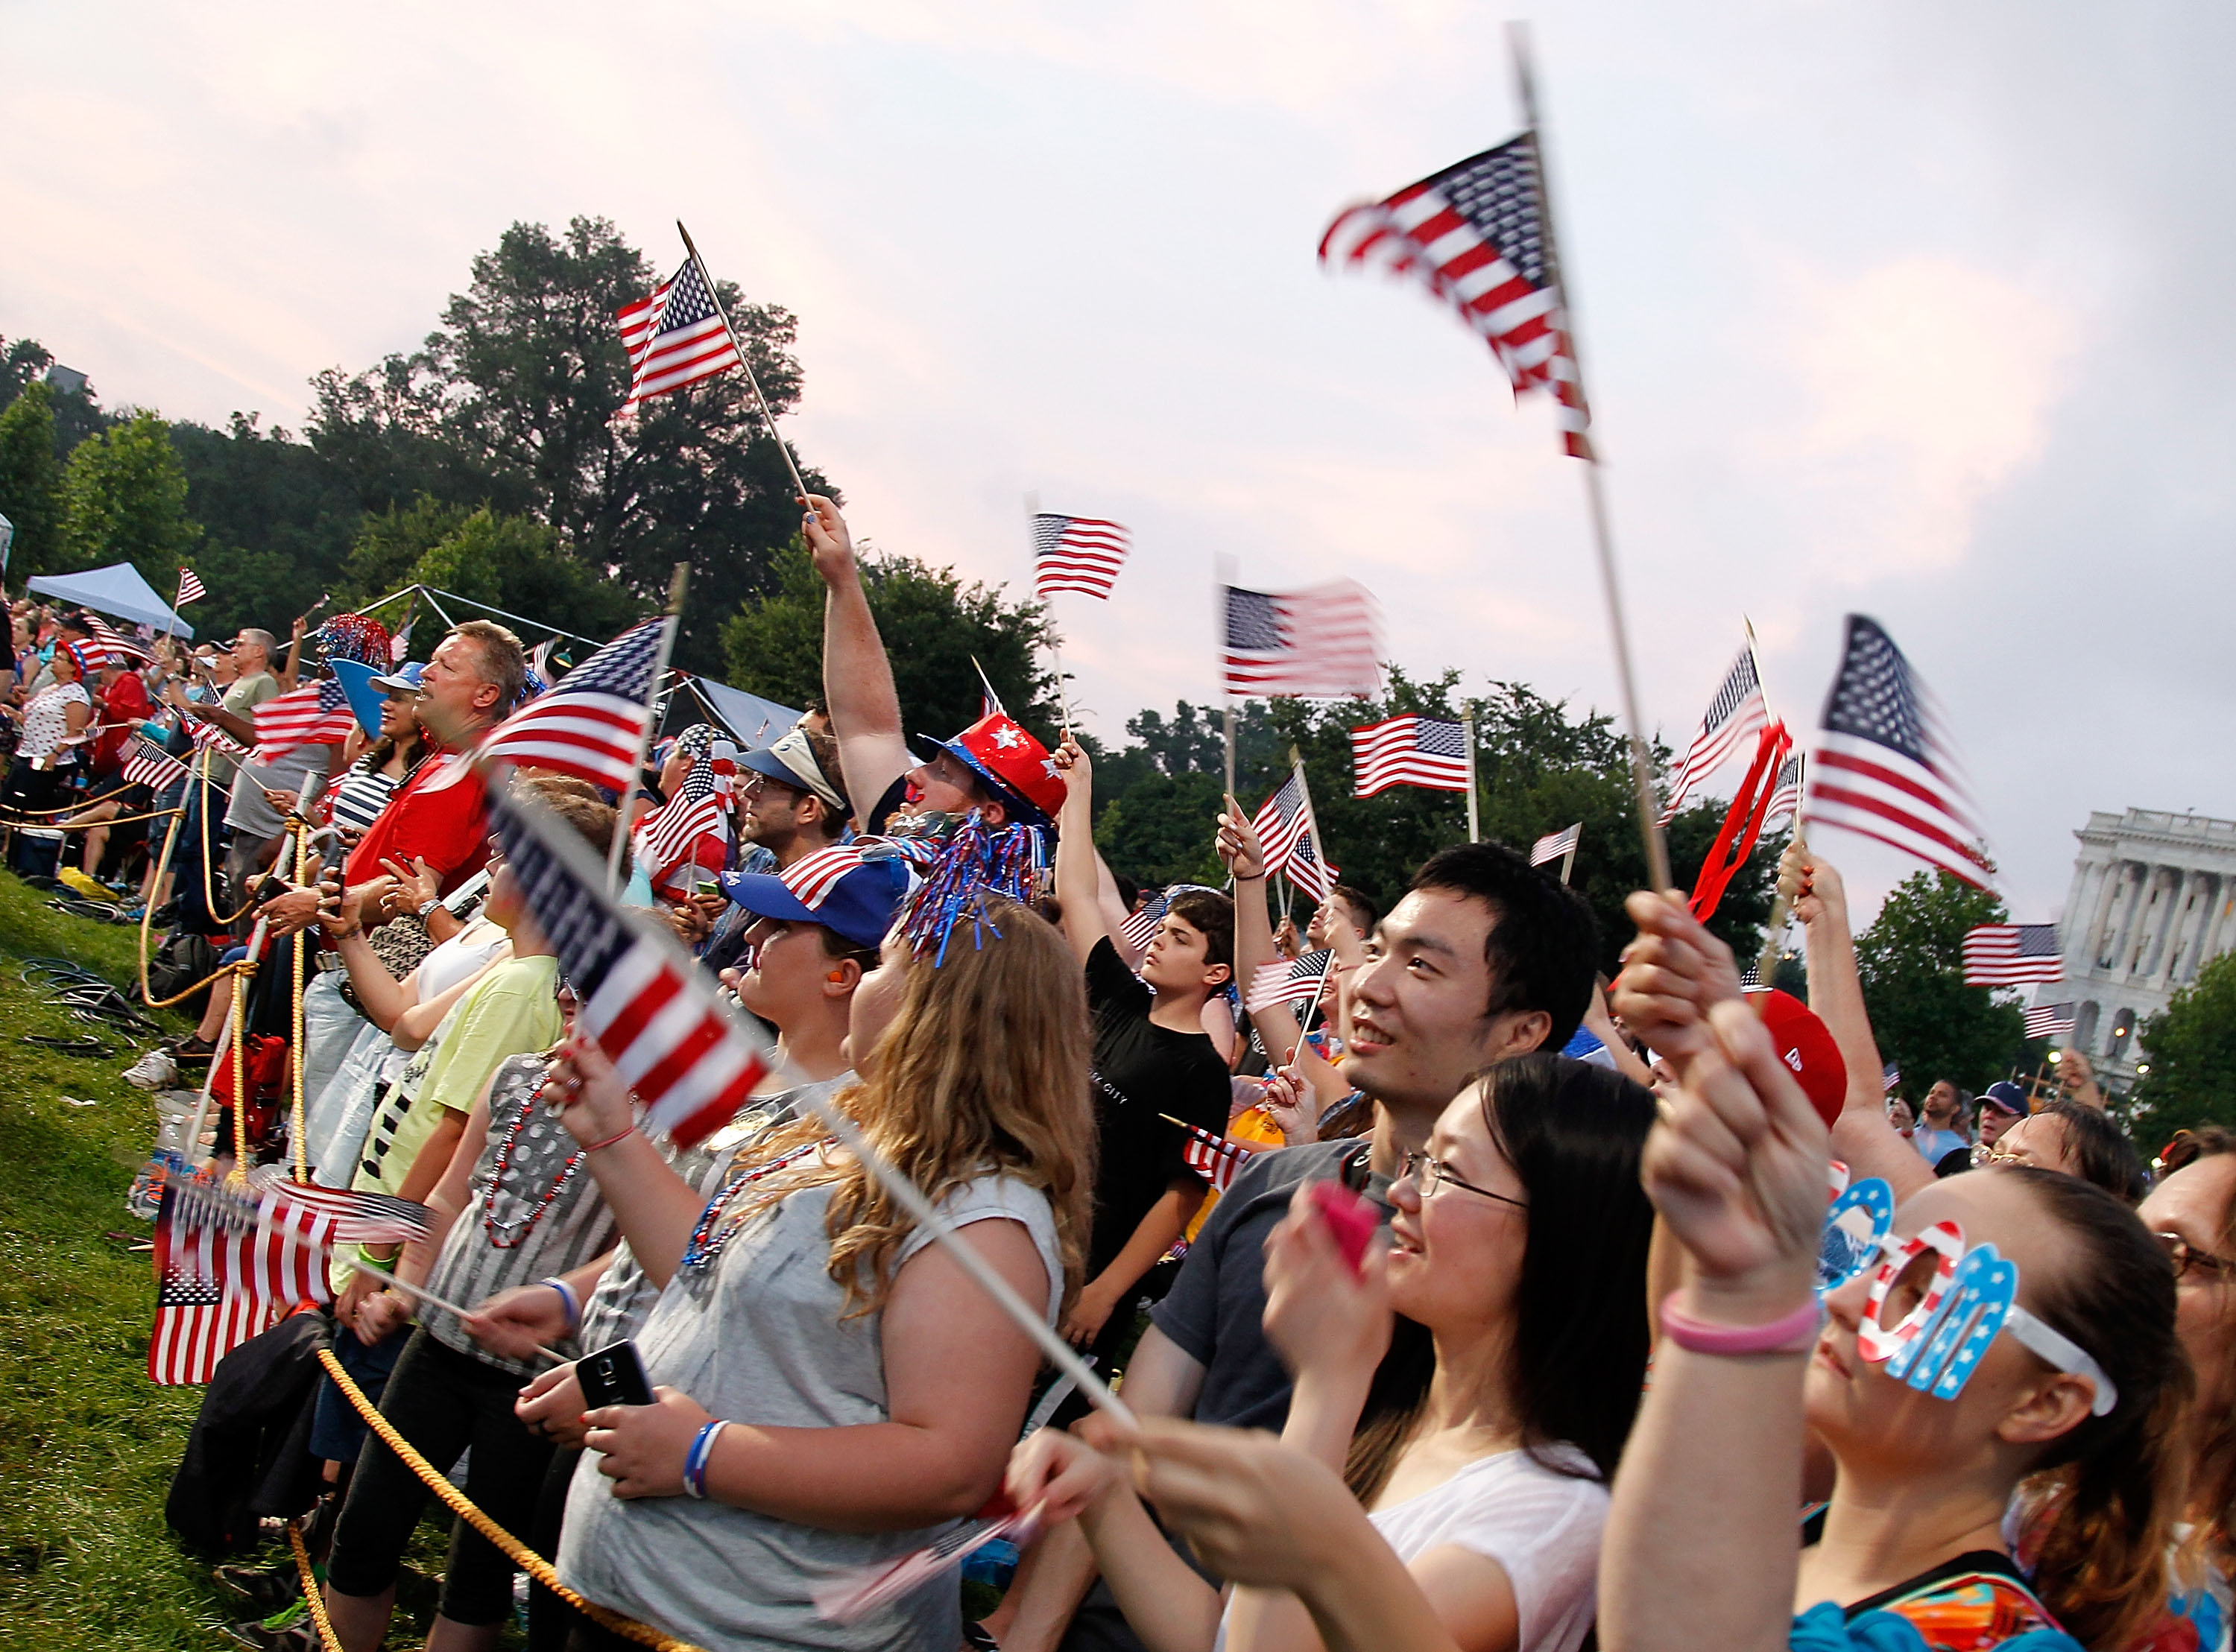 What to know about the 2019 ‘Capitol Fourth’ concert in DC